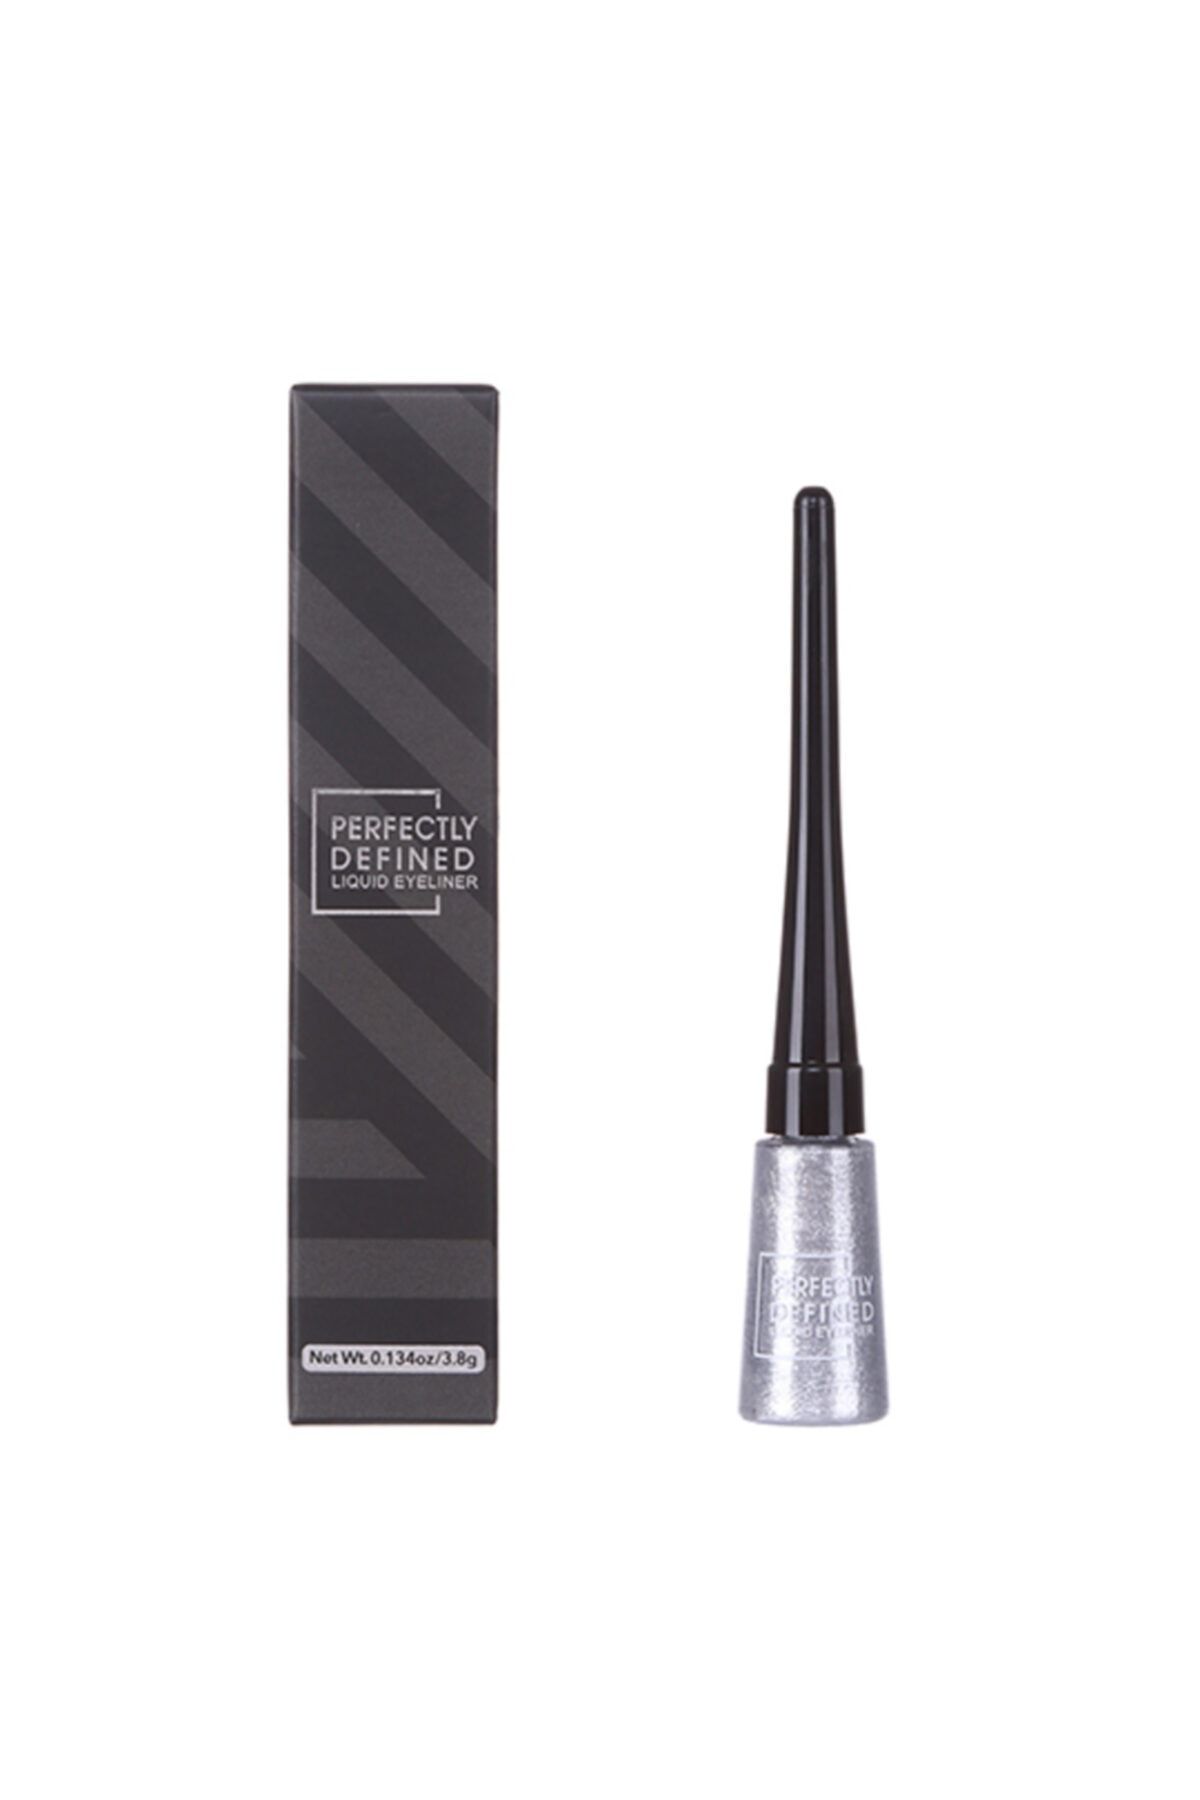 Miniso Mınıso Perfectly Defined Gleaming Liquid Eyeliner (01 Silver White)